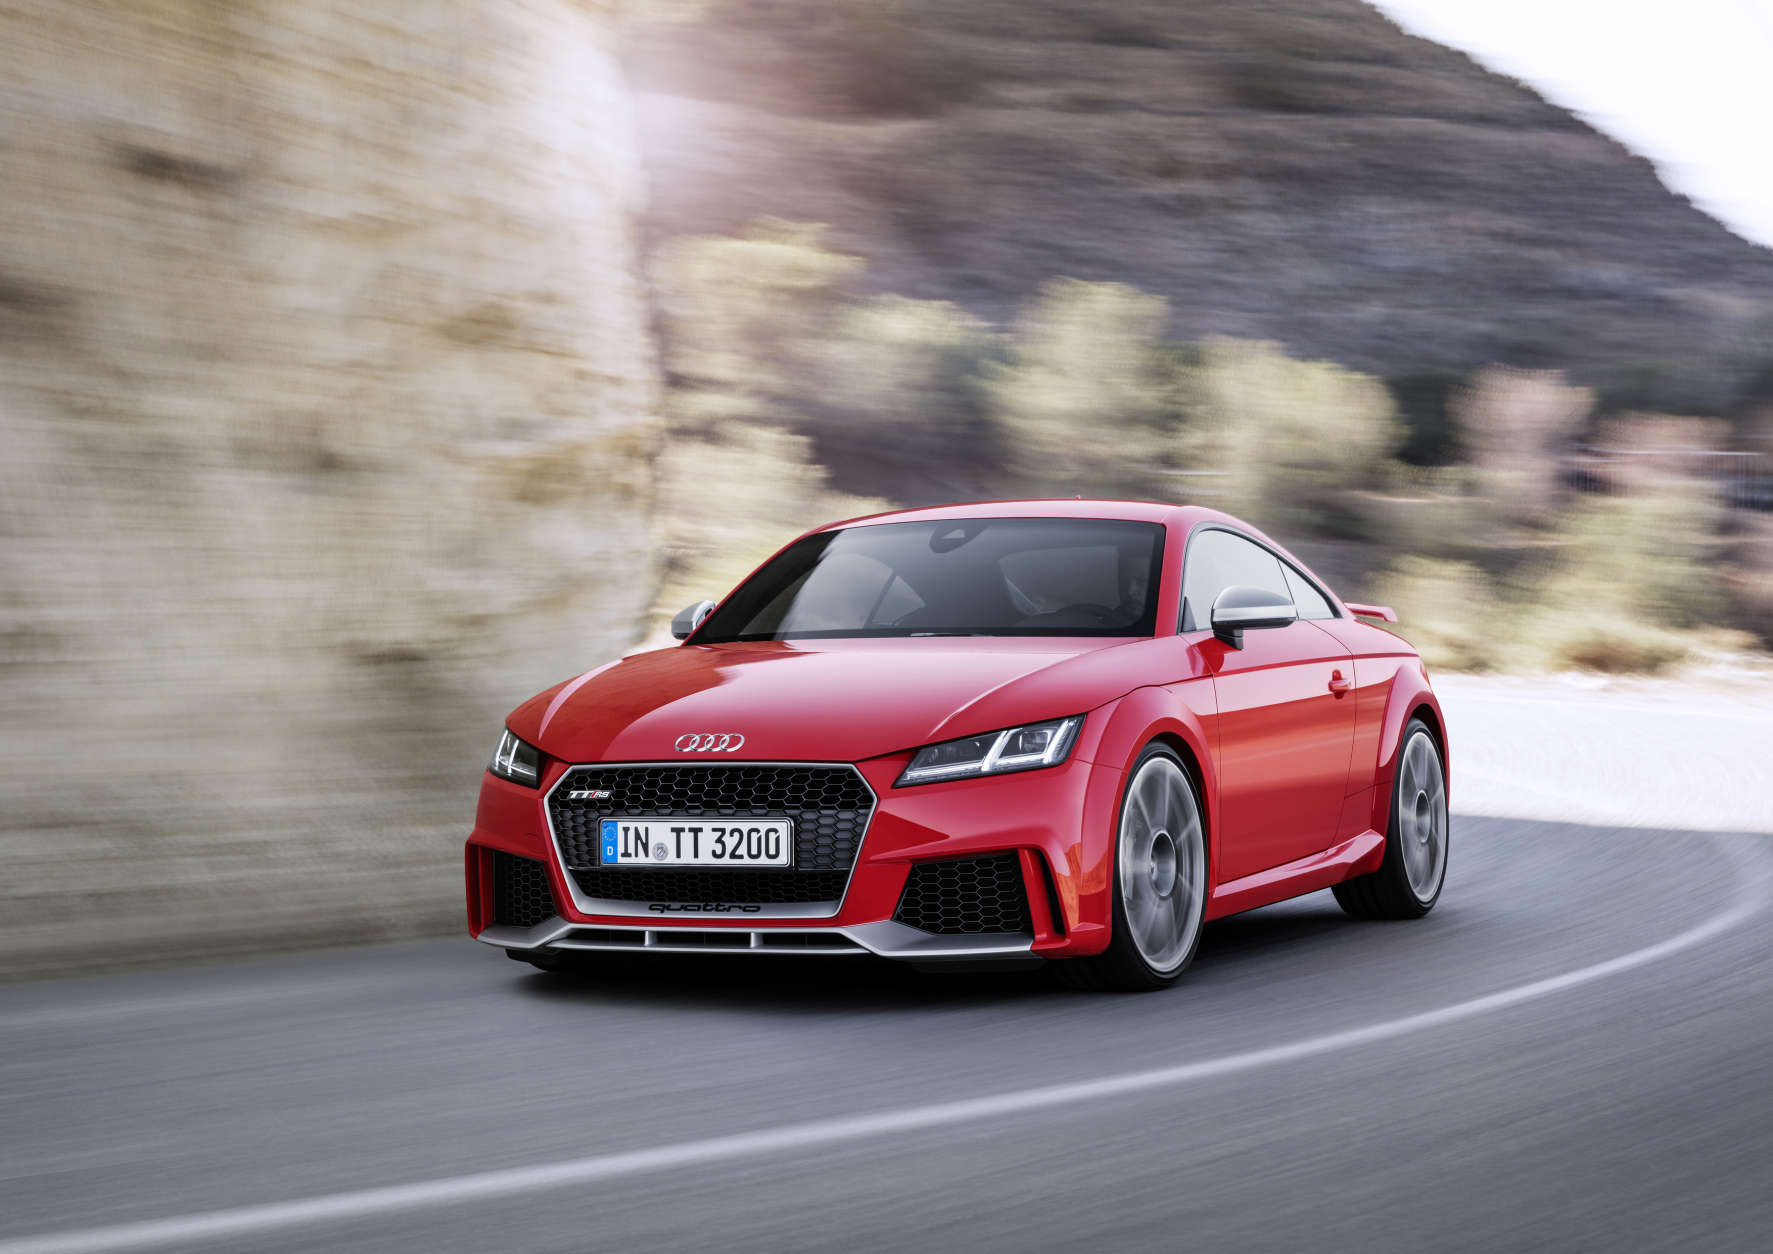 Audi TT-RS, $60,000 (est.)
Bringing supercar speed to the sports car market is the wildly popular follow-up to the TT-RS. With 400 horsepower from a widely acclaimed, new five-cylinder, the TT-RS corners at an extreme 1.2 g-forces and accelerates from 0 to 62 mph in only 3.7 seconds.